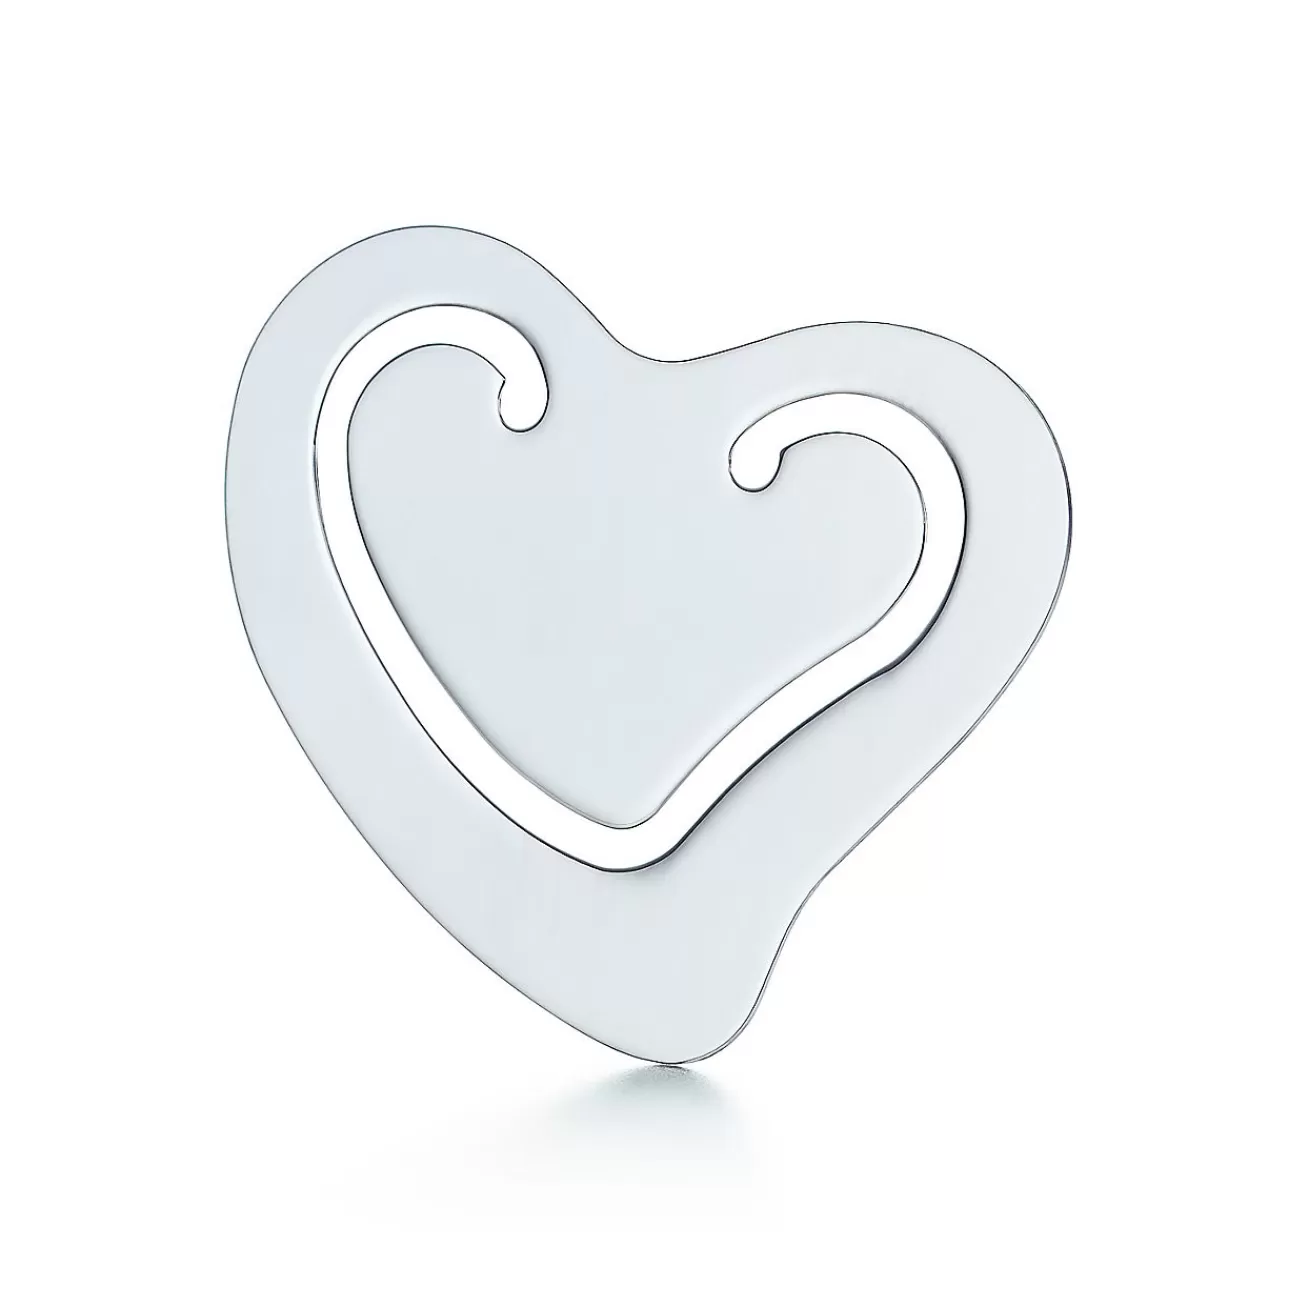 Tiffany & Co. Elsa Peretti® Heart bookmark in sterling silver. | ^ Stationery, Games & Unique Objects | Games & Novelties